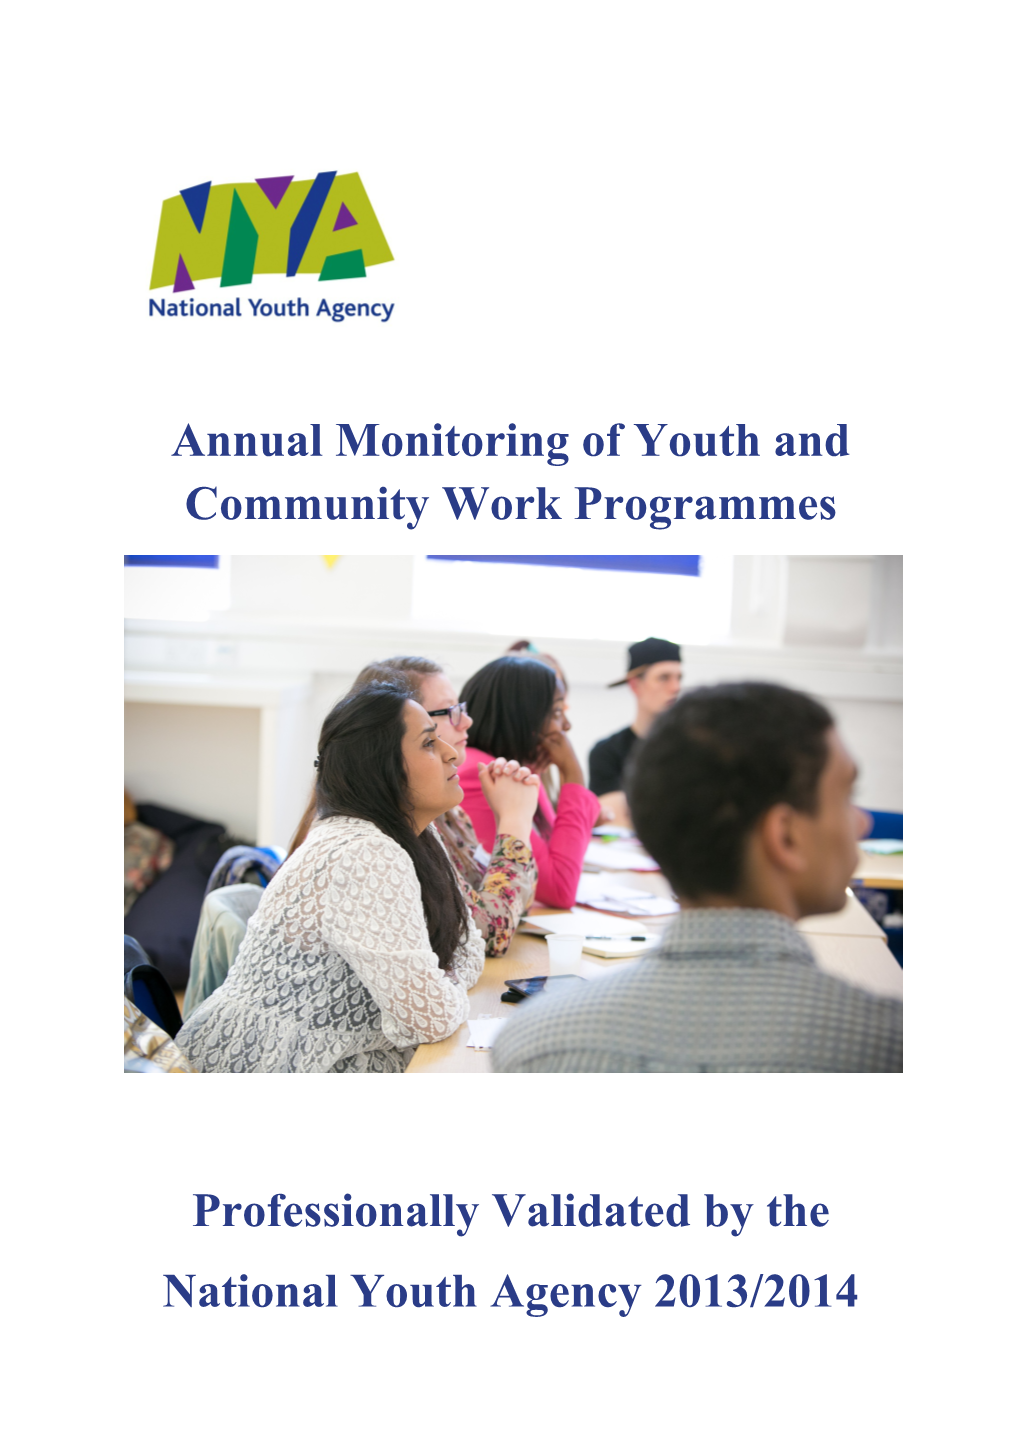 Annual Monitoring of Youth and Community Work Programmes